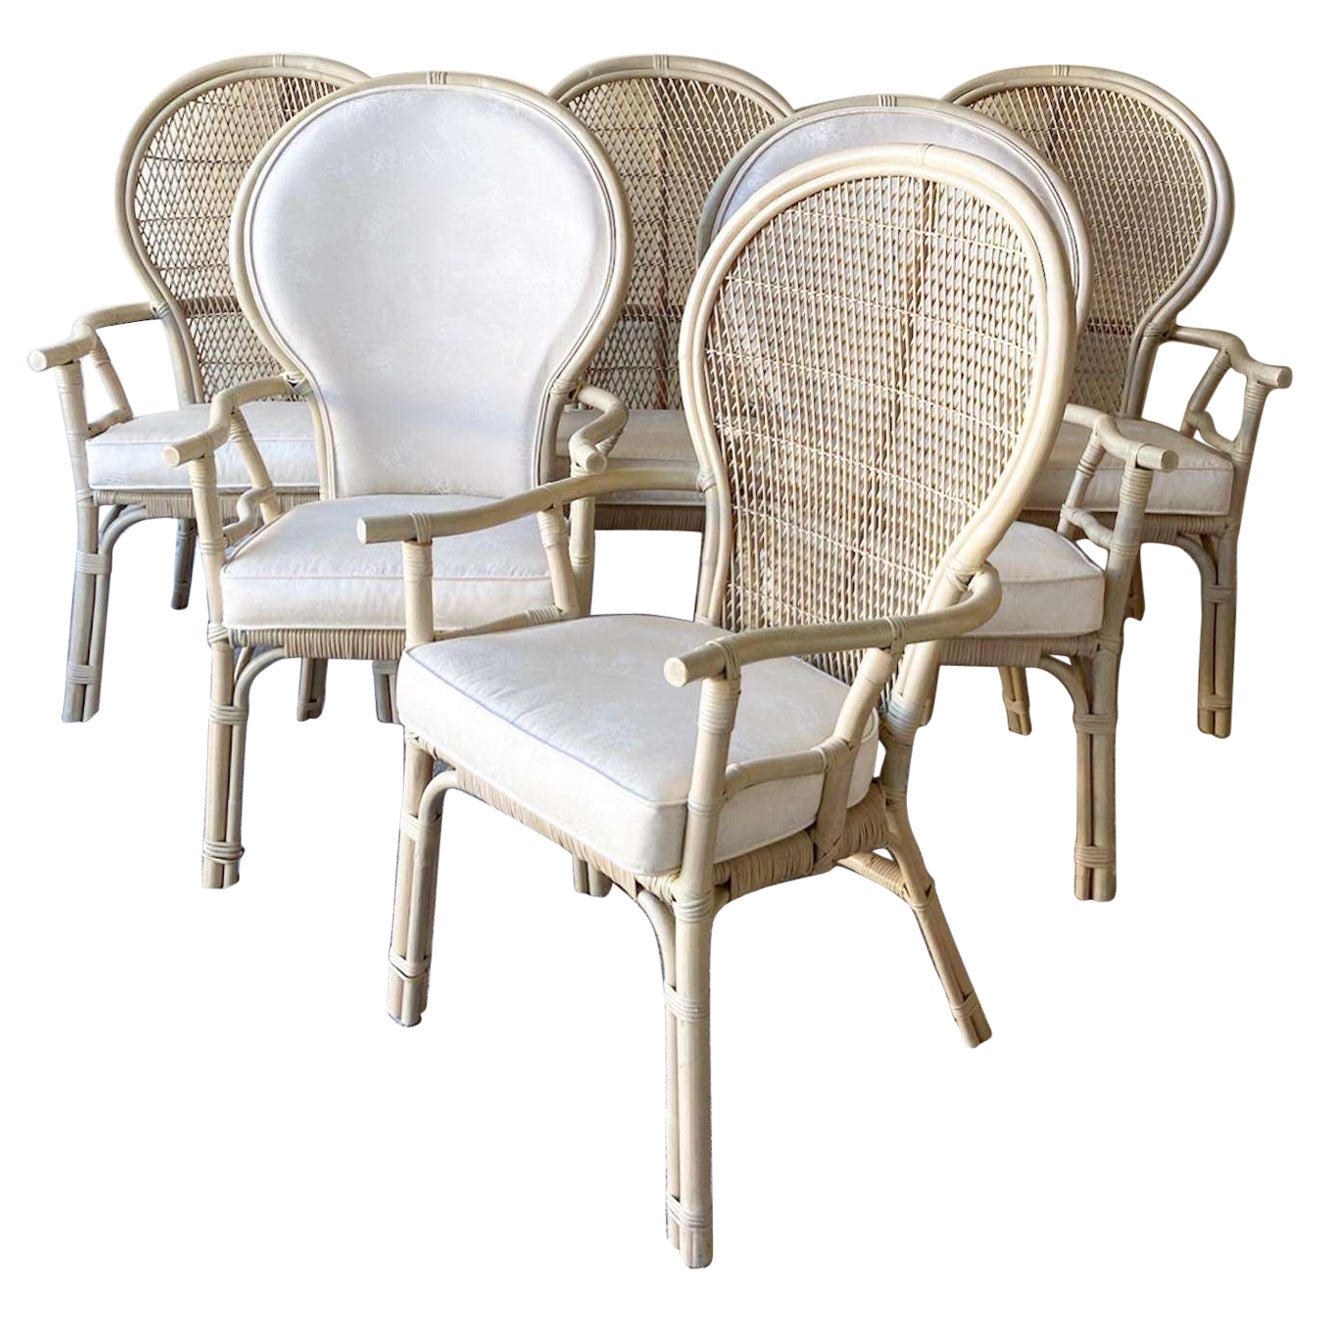 Boho Chic Balloon Back Bamboo Rattan Dining Chairs - Set of 6